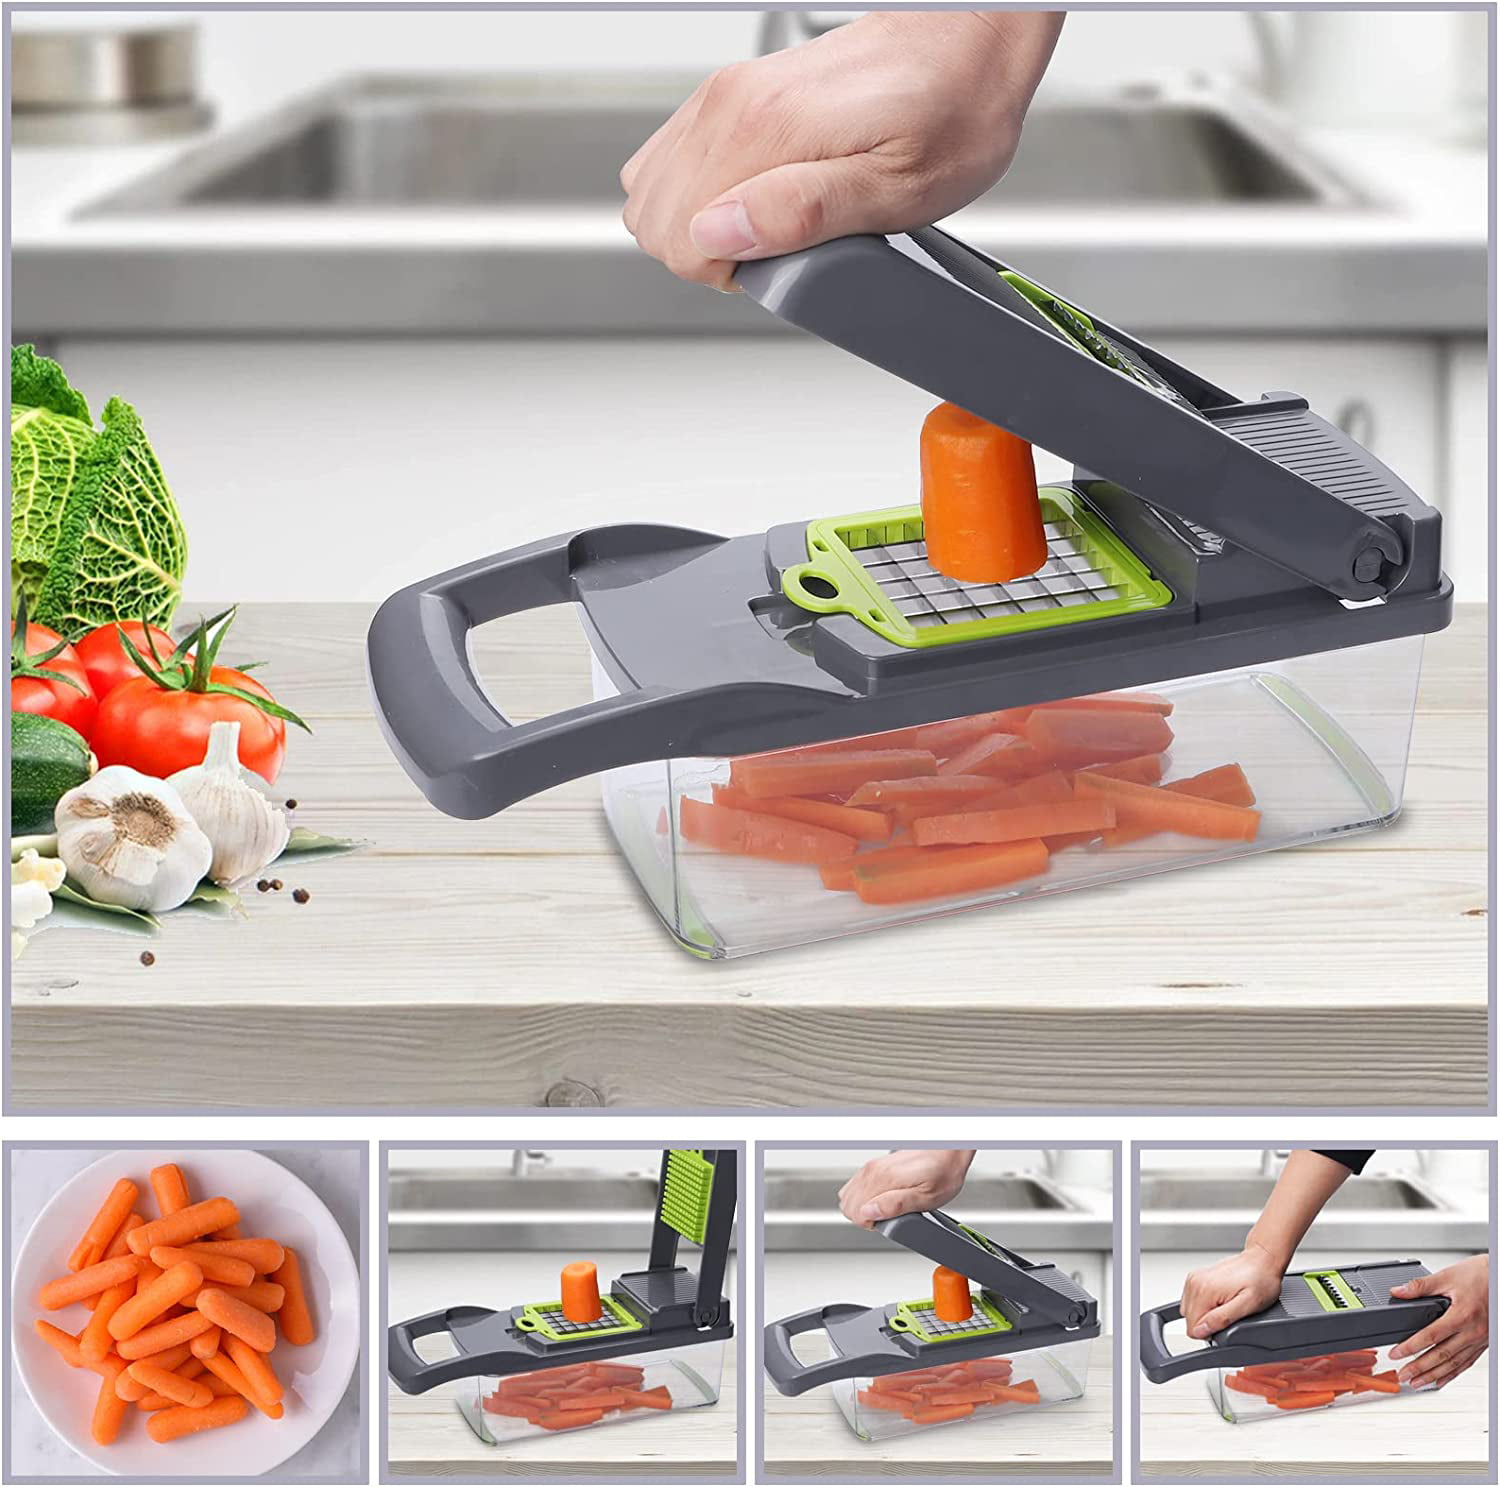 Vegetable Chopper, Artbros Veggie Chopper 13 in 1 Multifunctional Vegetable  Cutter, Onion Food Chopper with Container, Cheese Grater Mandoline Slicer